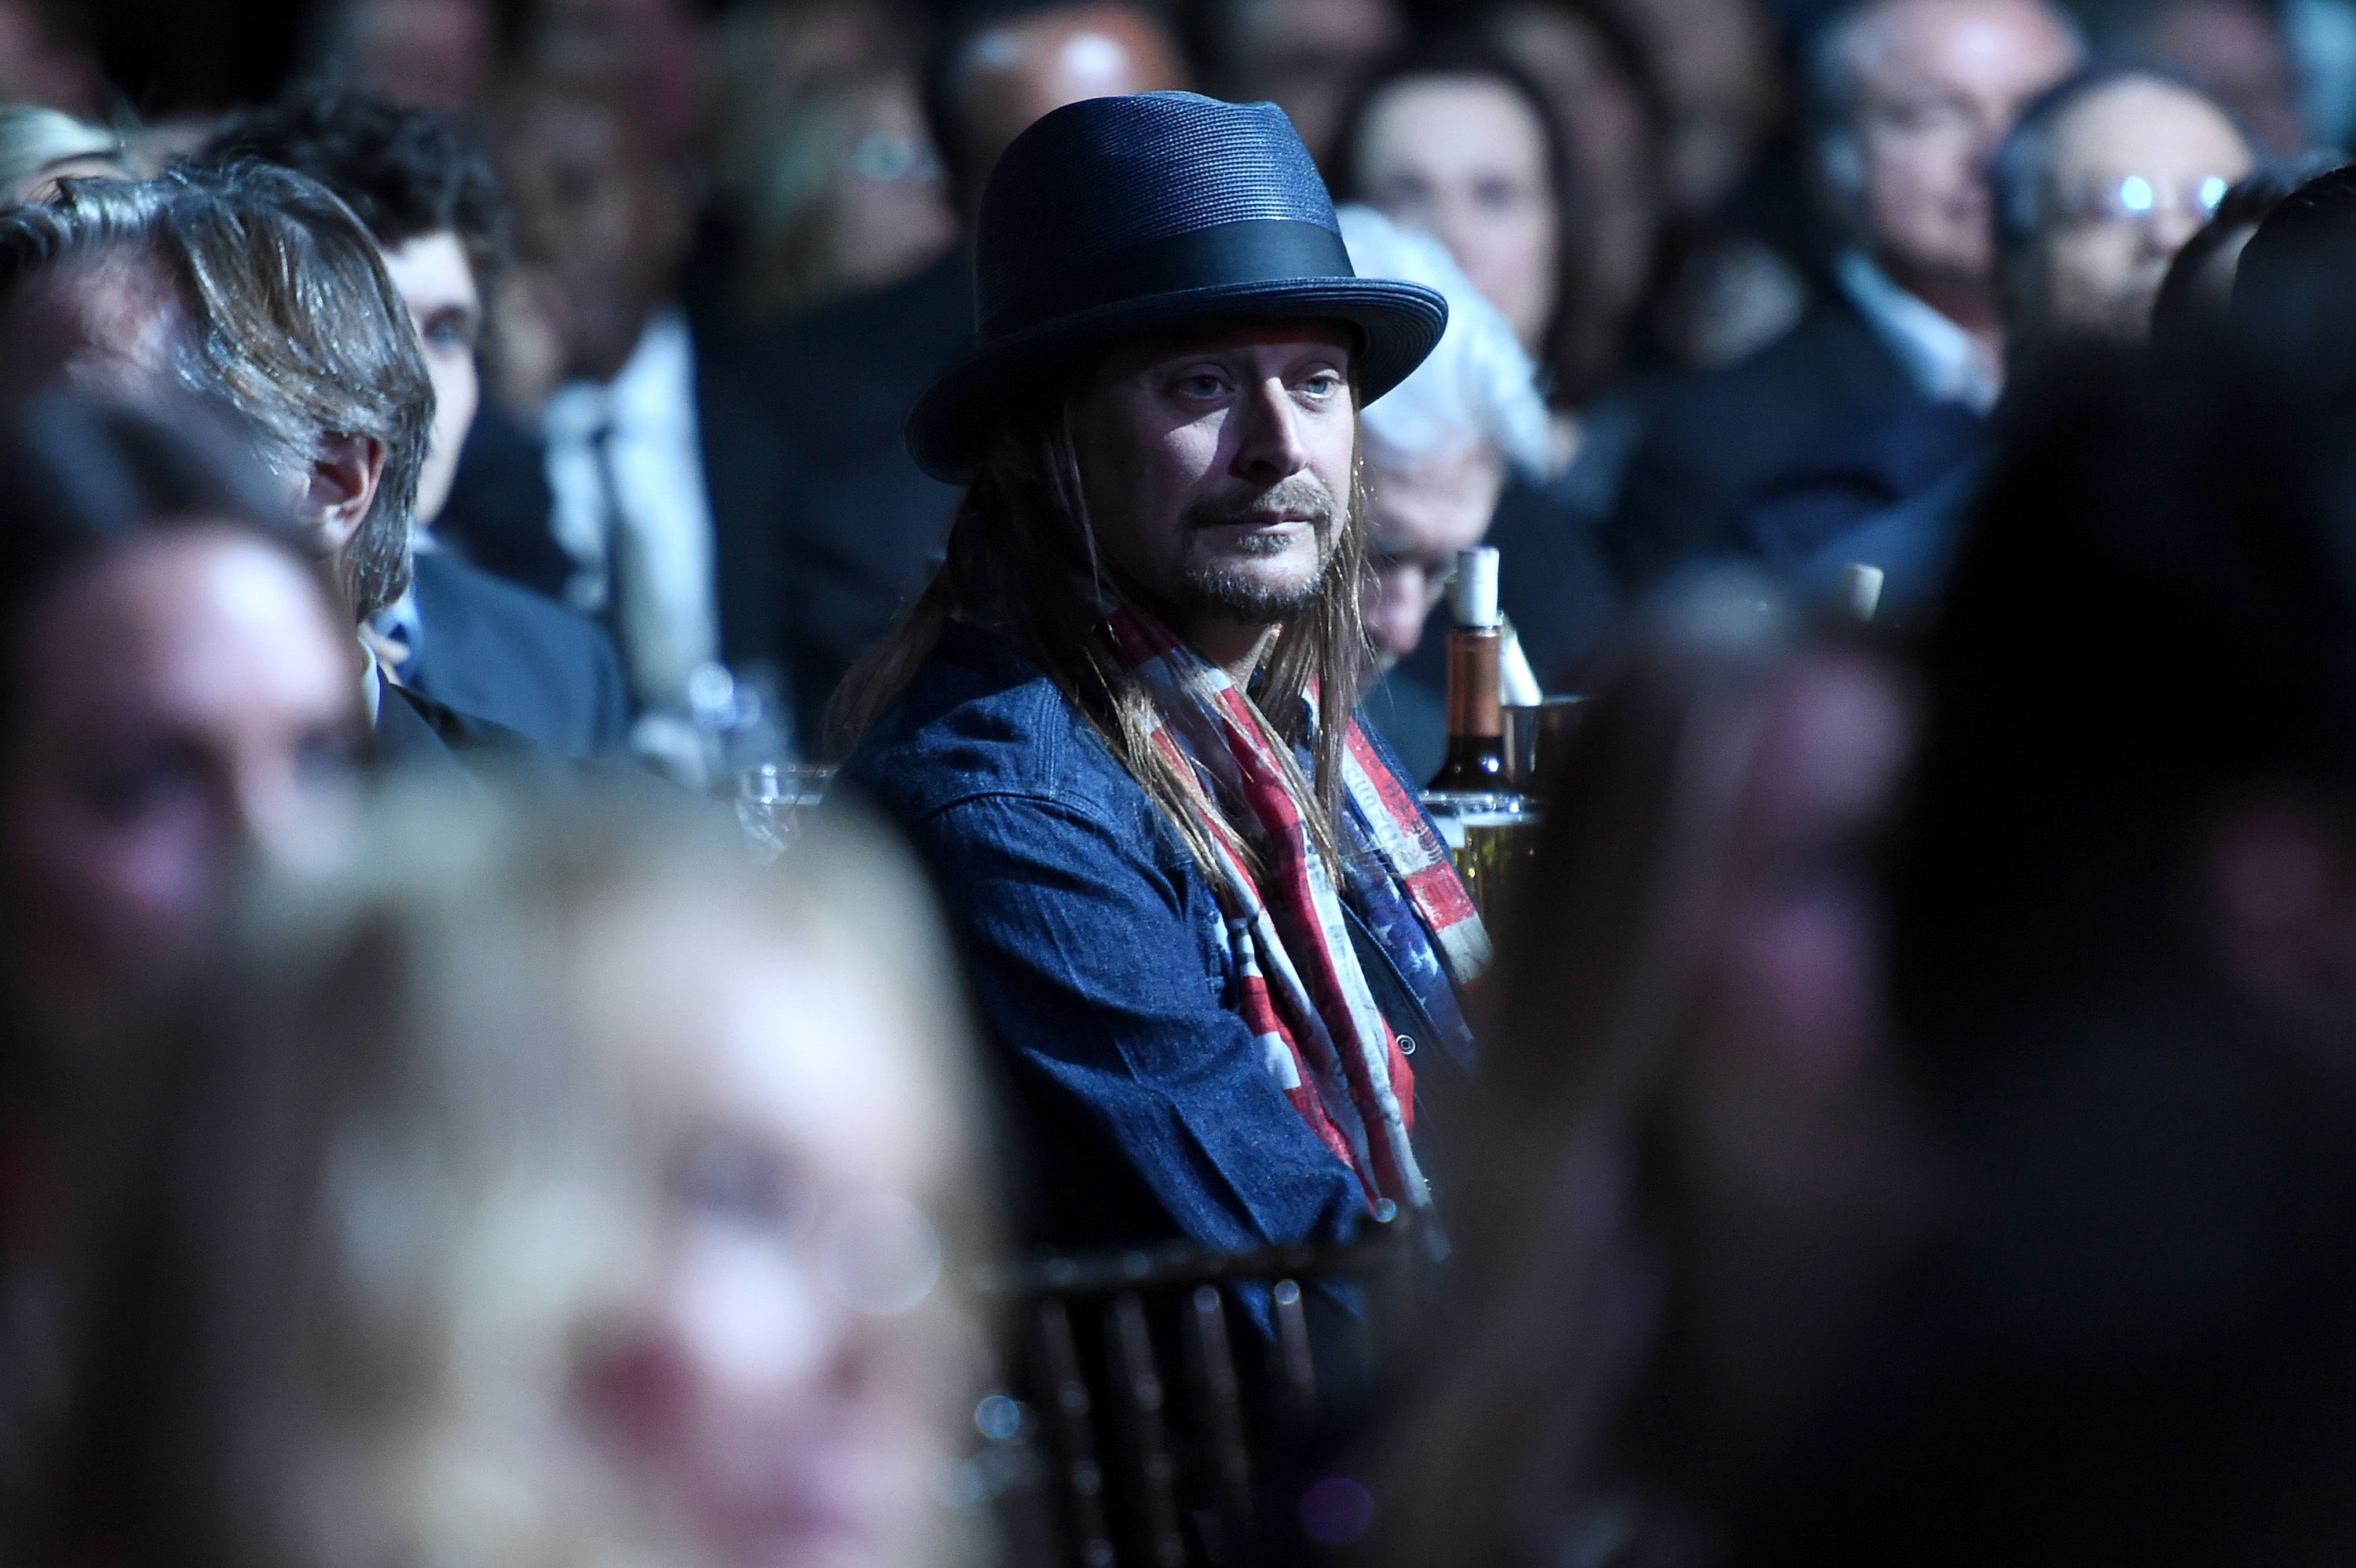 Kid Rock attends the Rock And Roll Hall Of Fame Induction Ceremony in New York City, on April 8, 2016. (Jamie McCarthy—Getty Images)